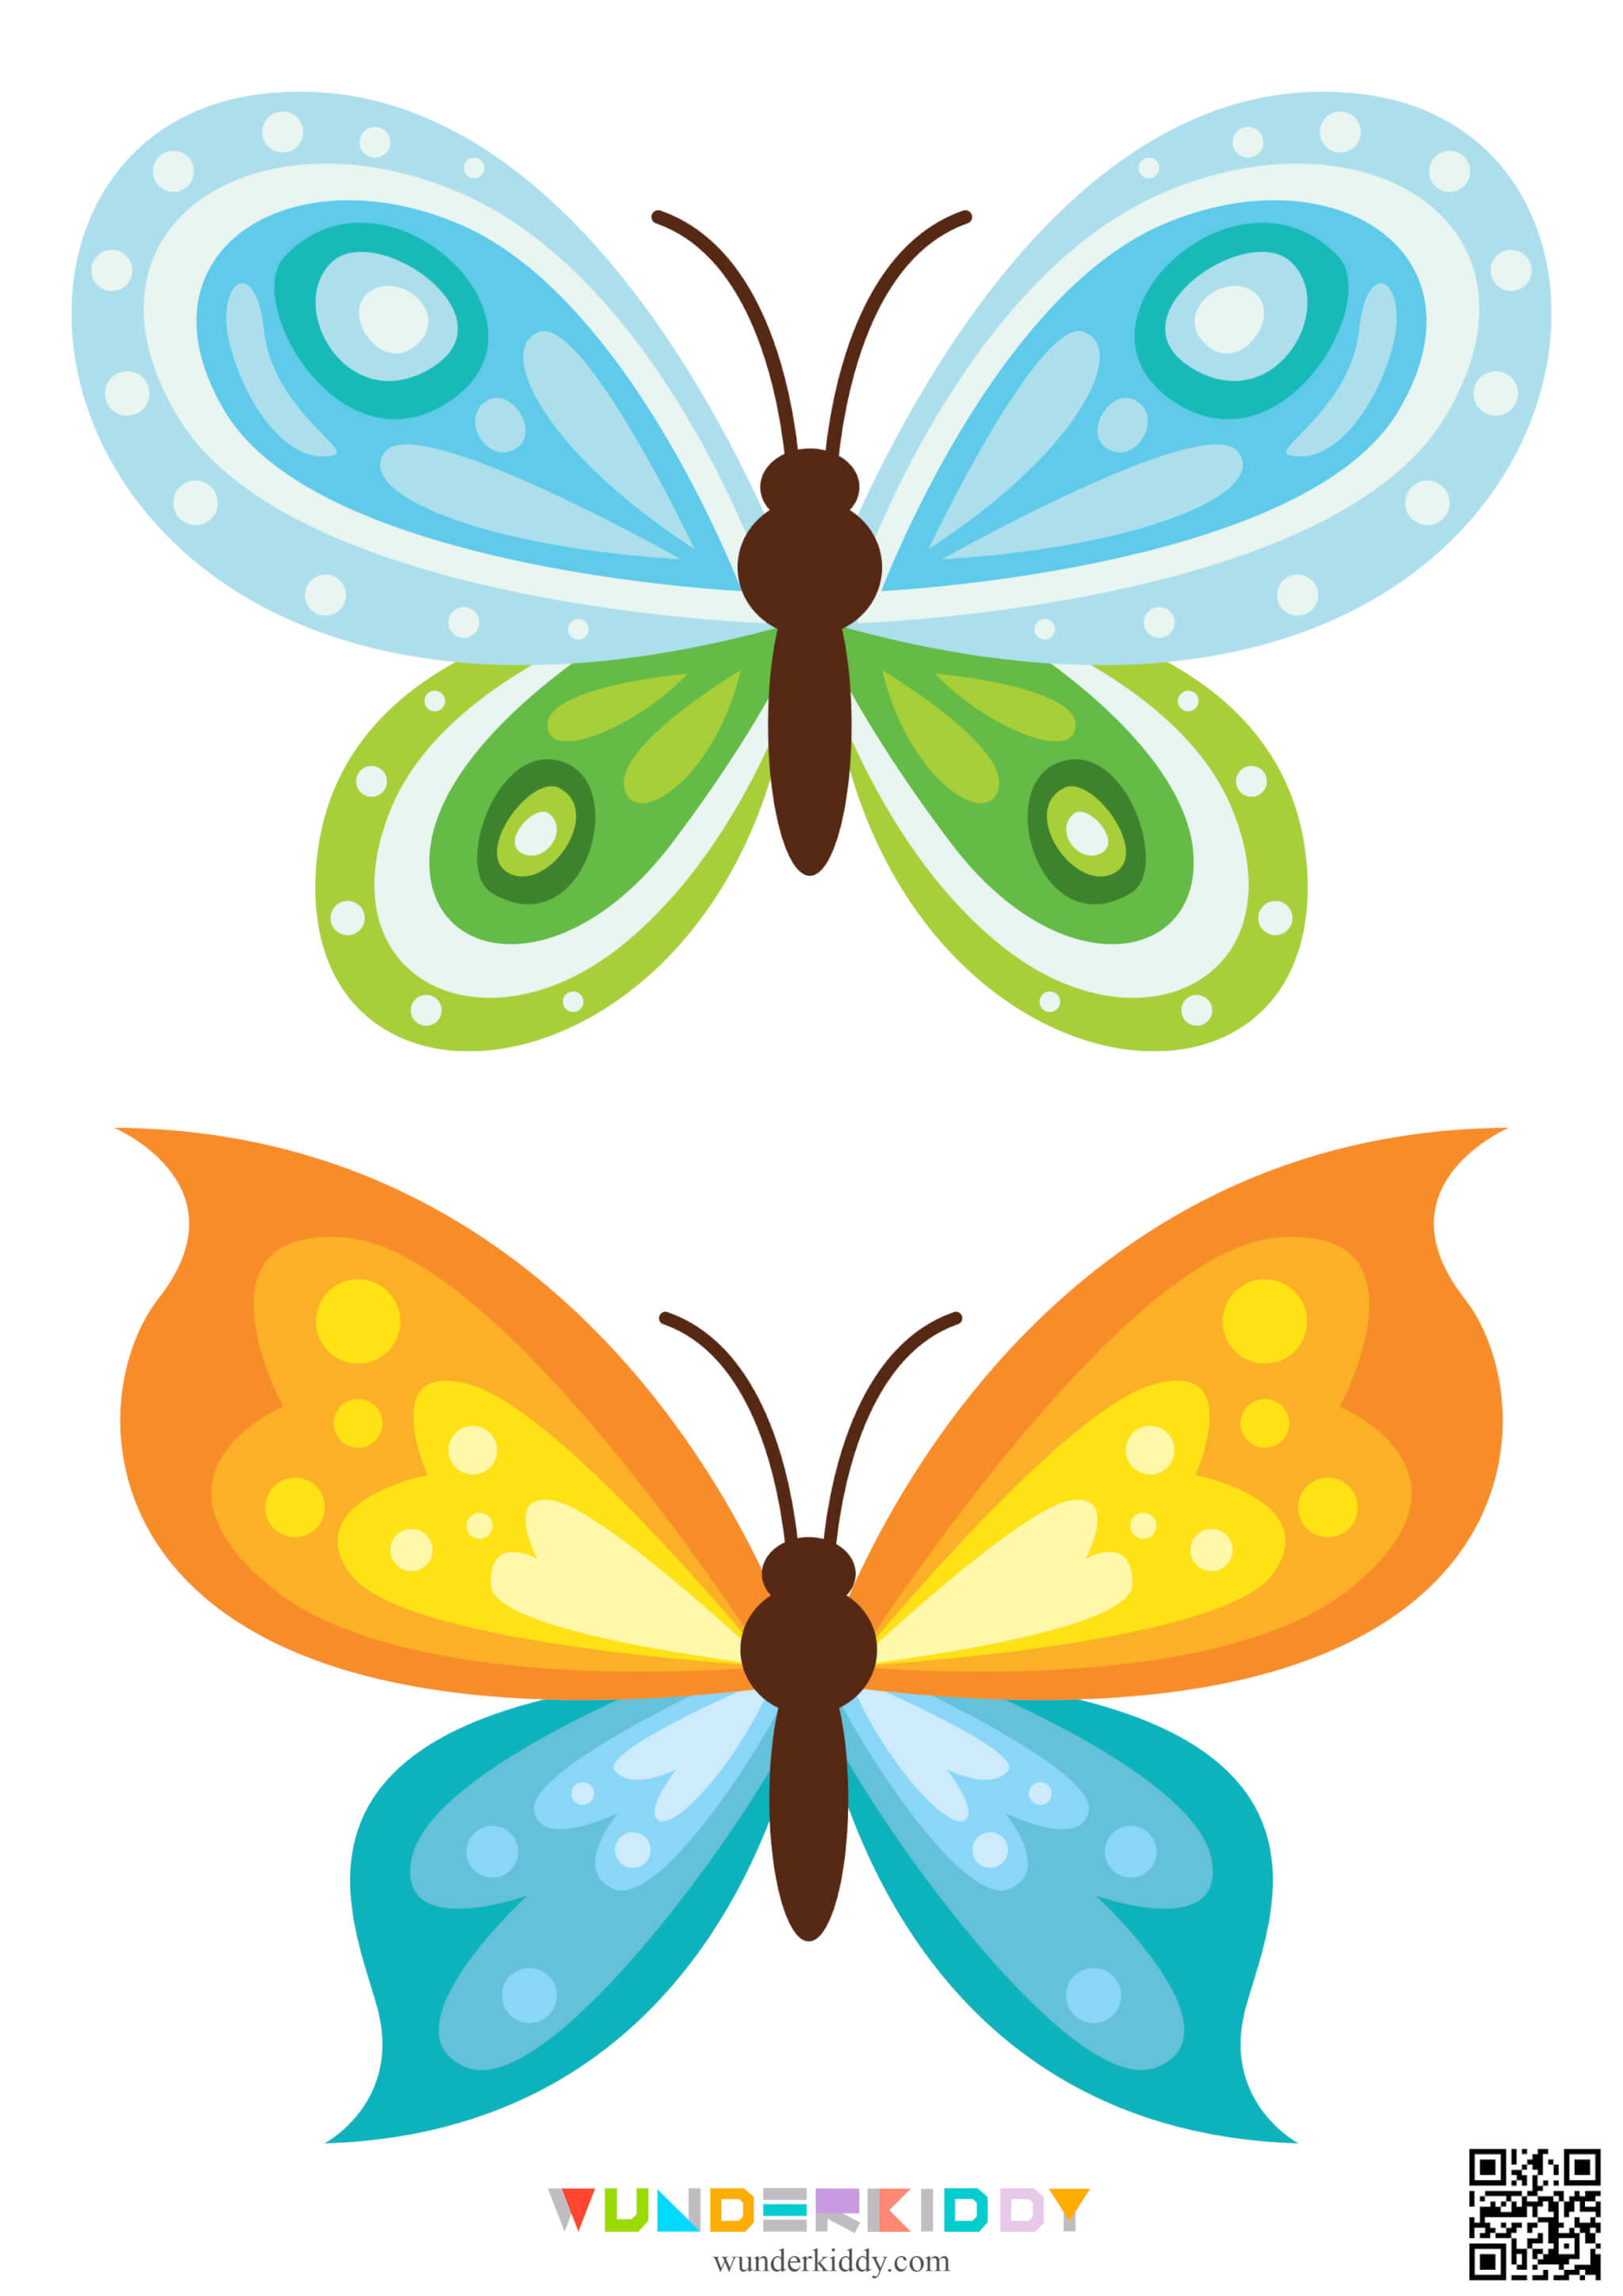 Template «Butterfly» - Image 2